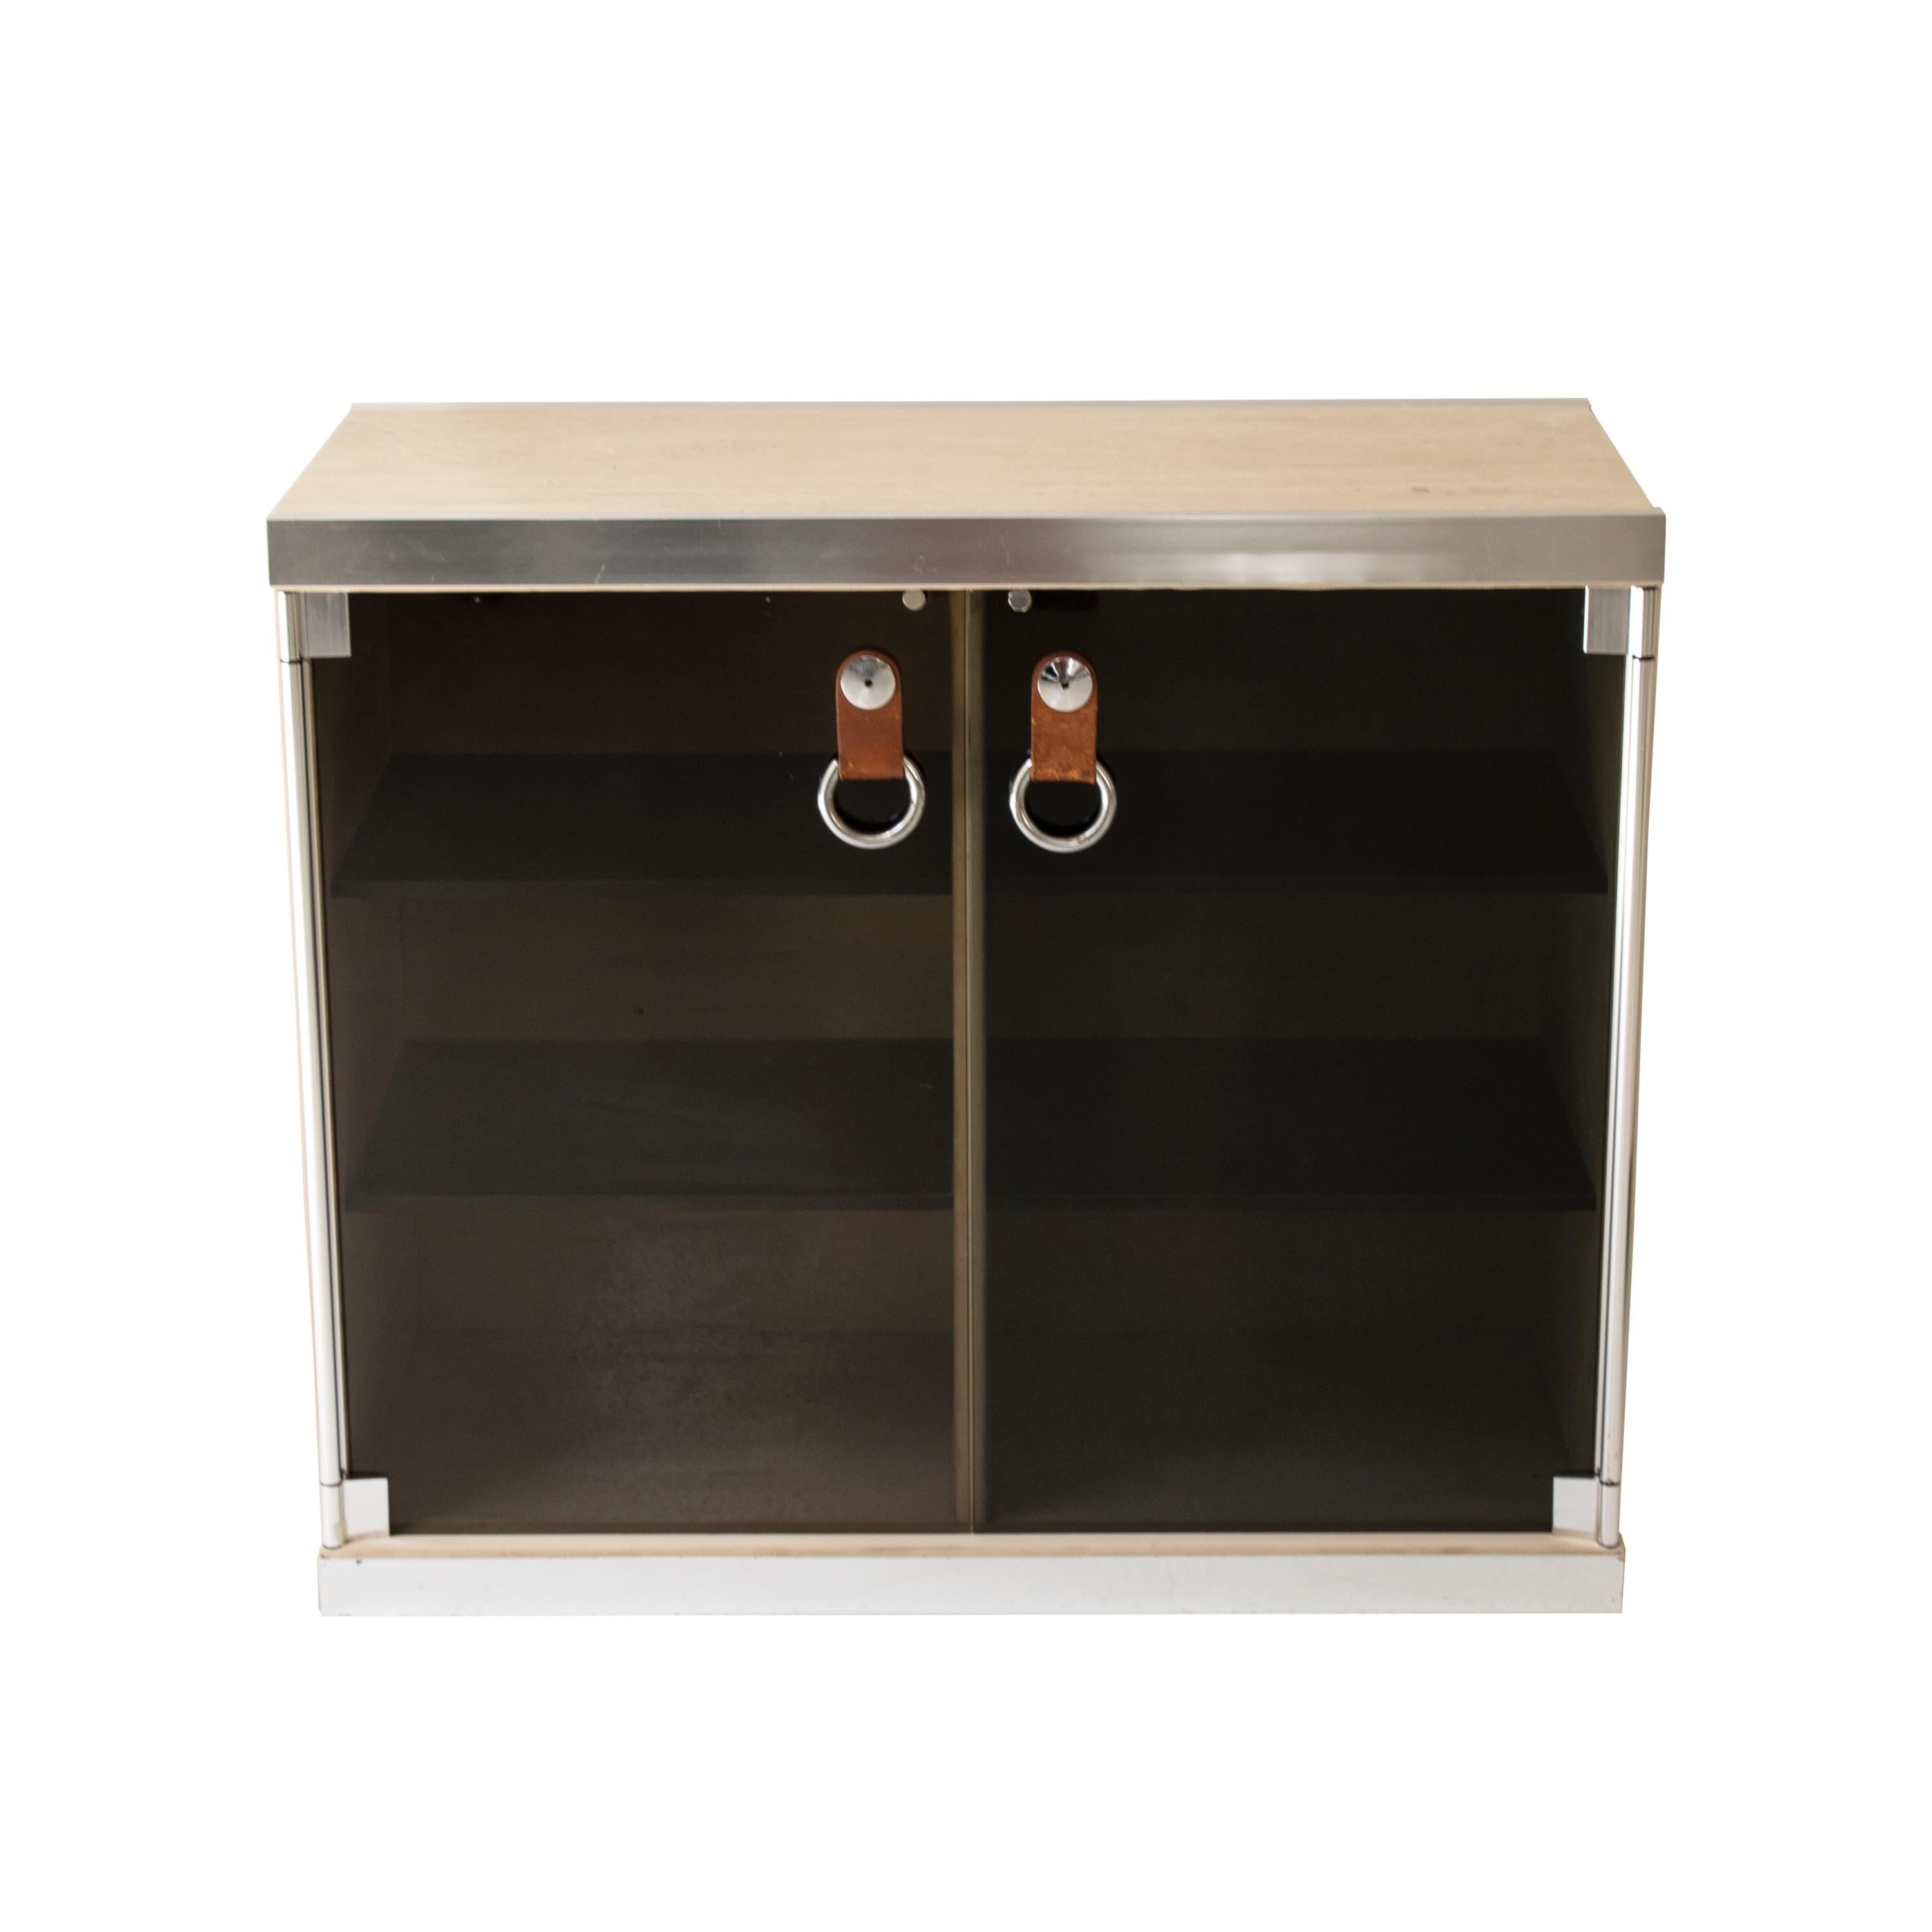 Mid-Century Modern cabinet designed in 1970 by the Italian designer Guido Faleschini for Hermes. 

The cabinet consists of a metal frame, a travertine marble top, and a beige velvet cover on the sides.

The double door is made of black tinted glass,